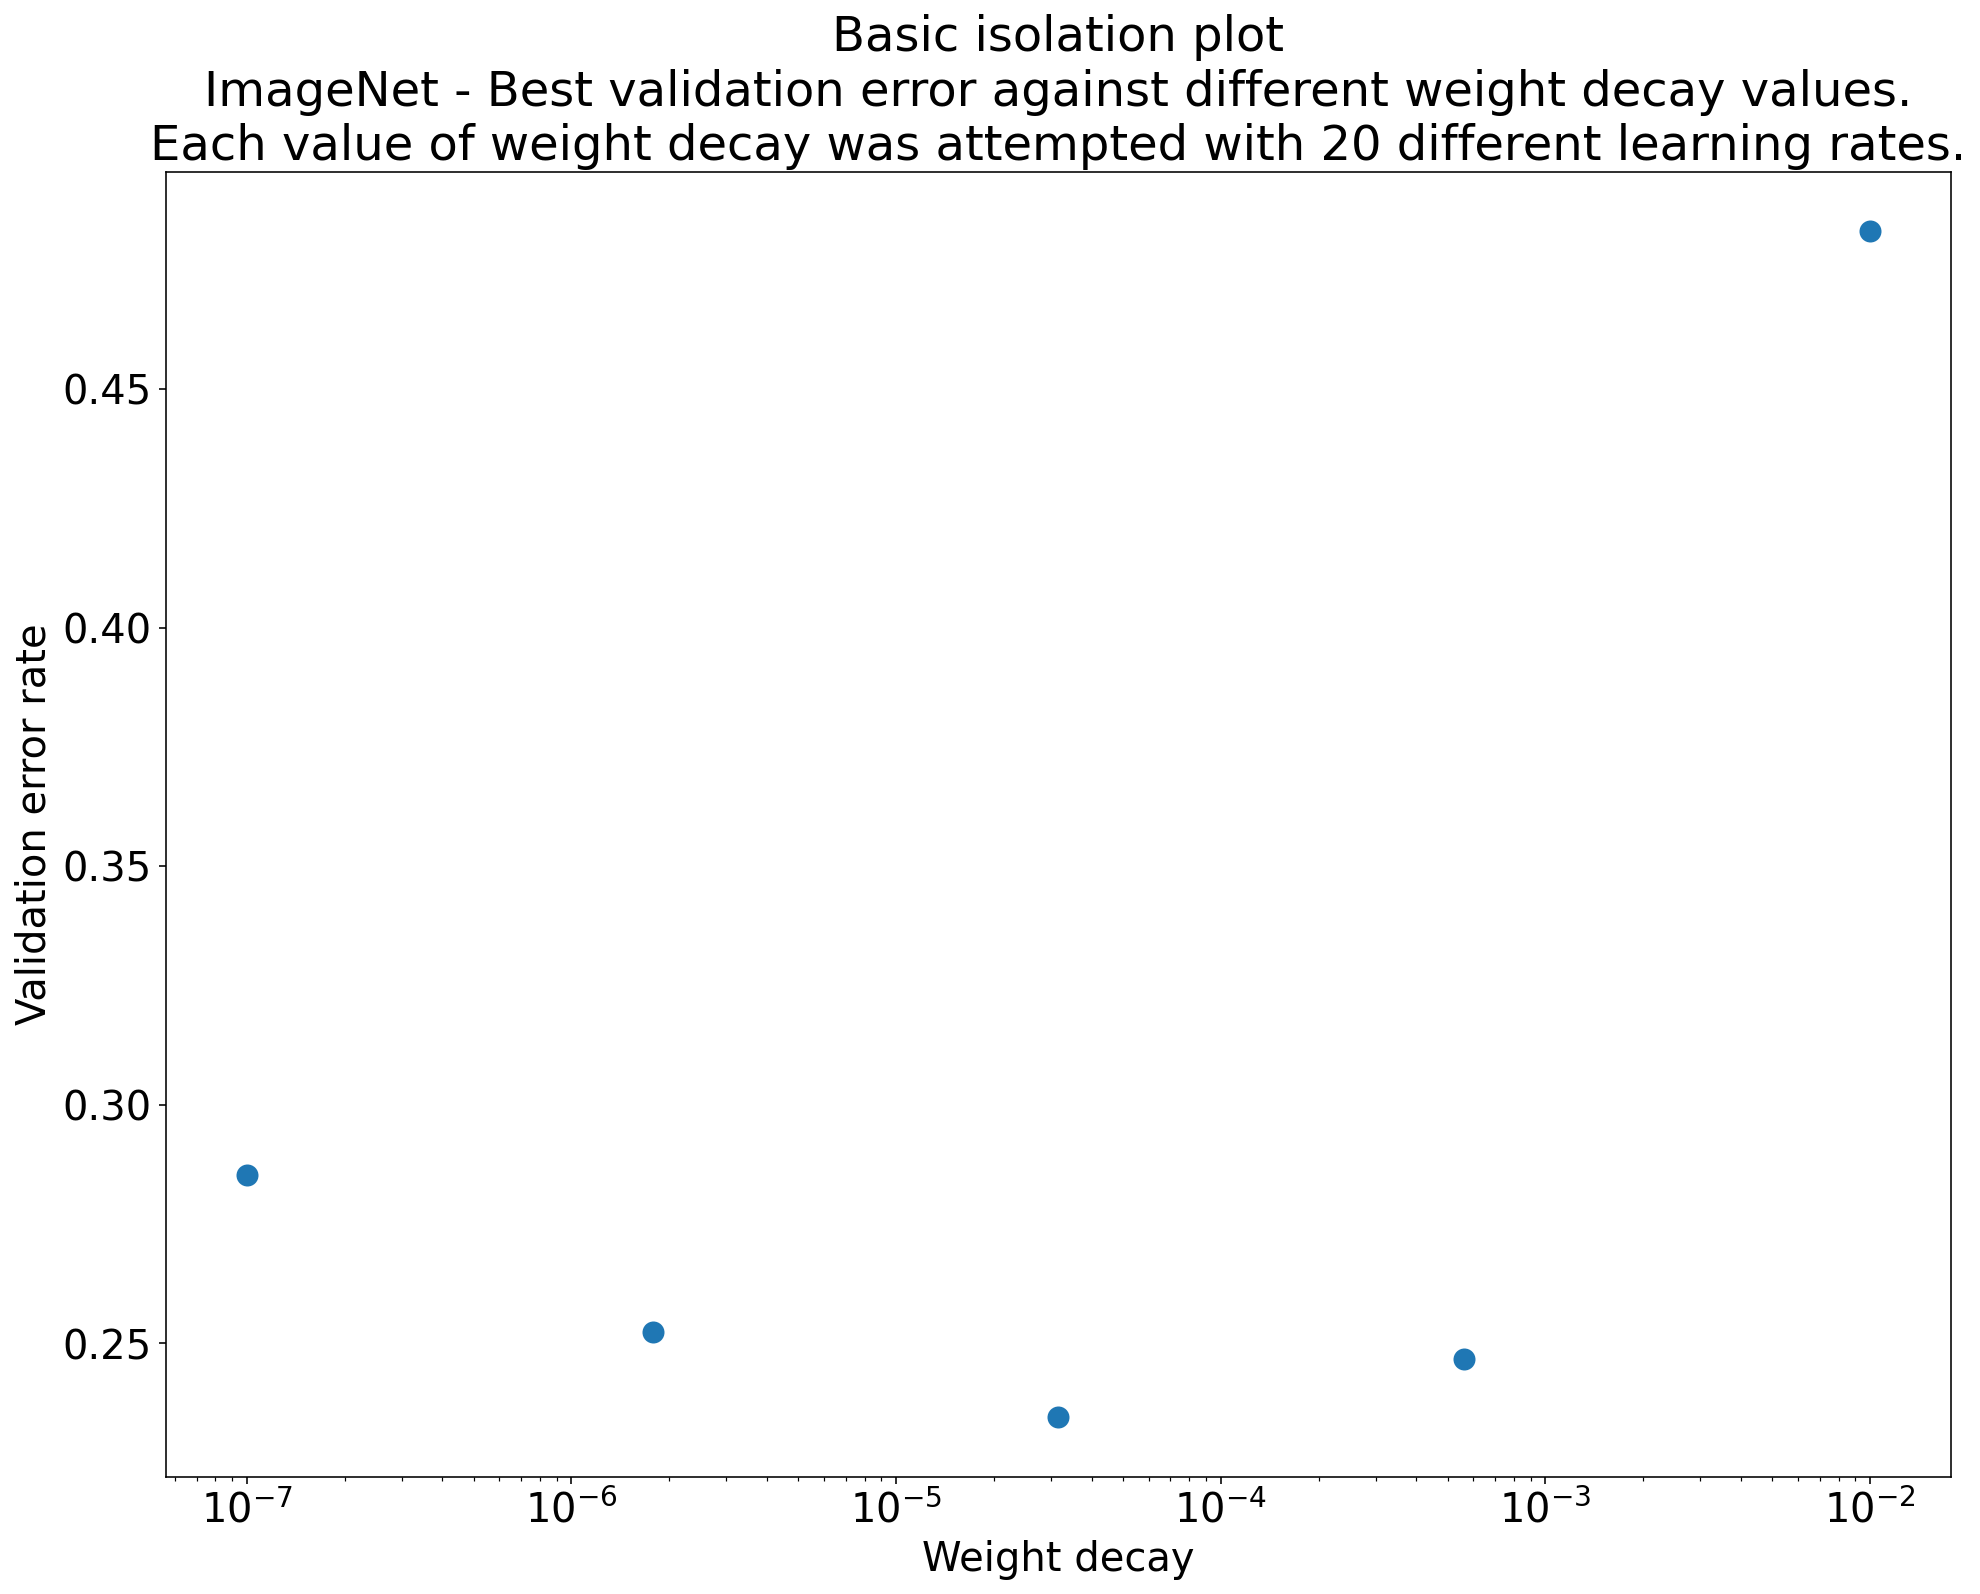 Isolation plot that investigates the best value of weight decay for ResNet-50
trained on ImageNet.